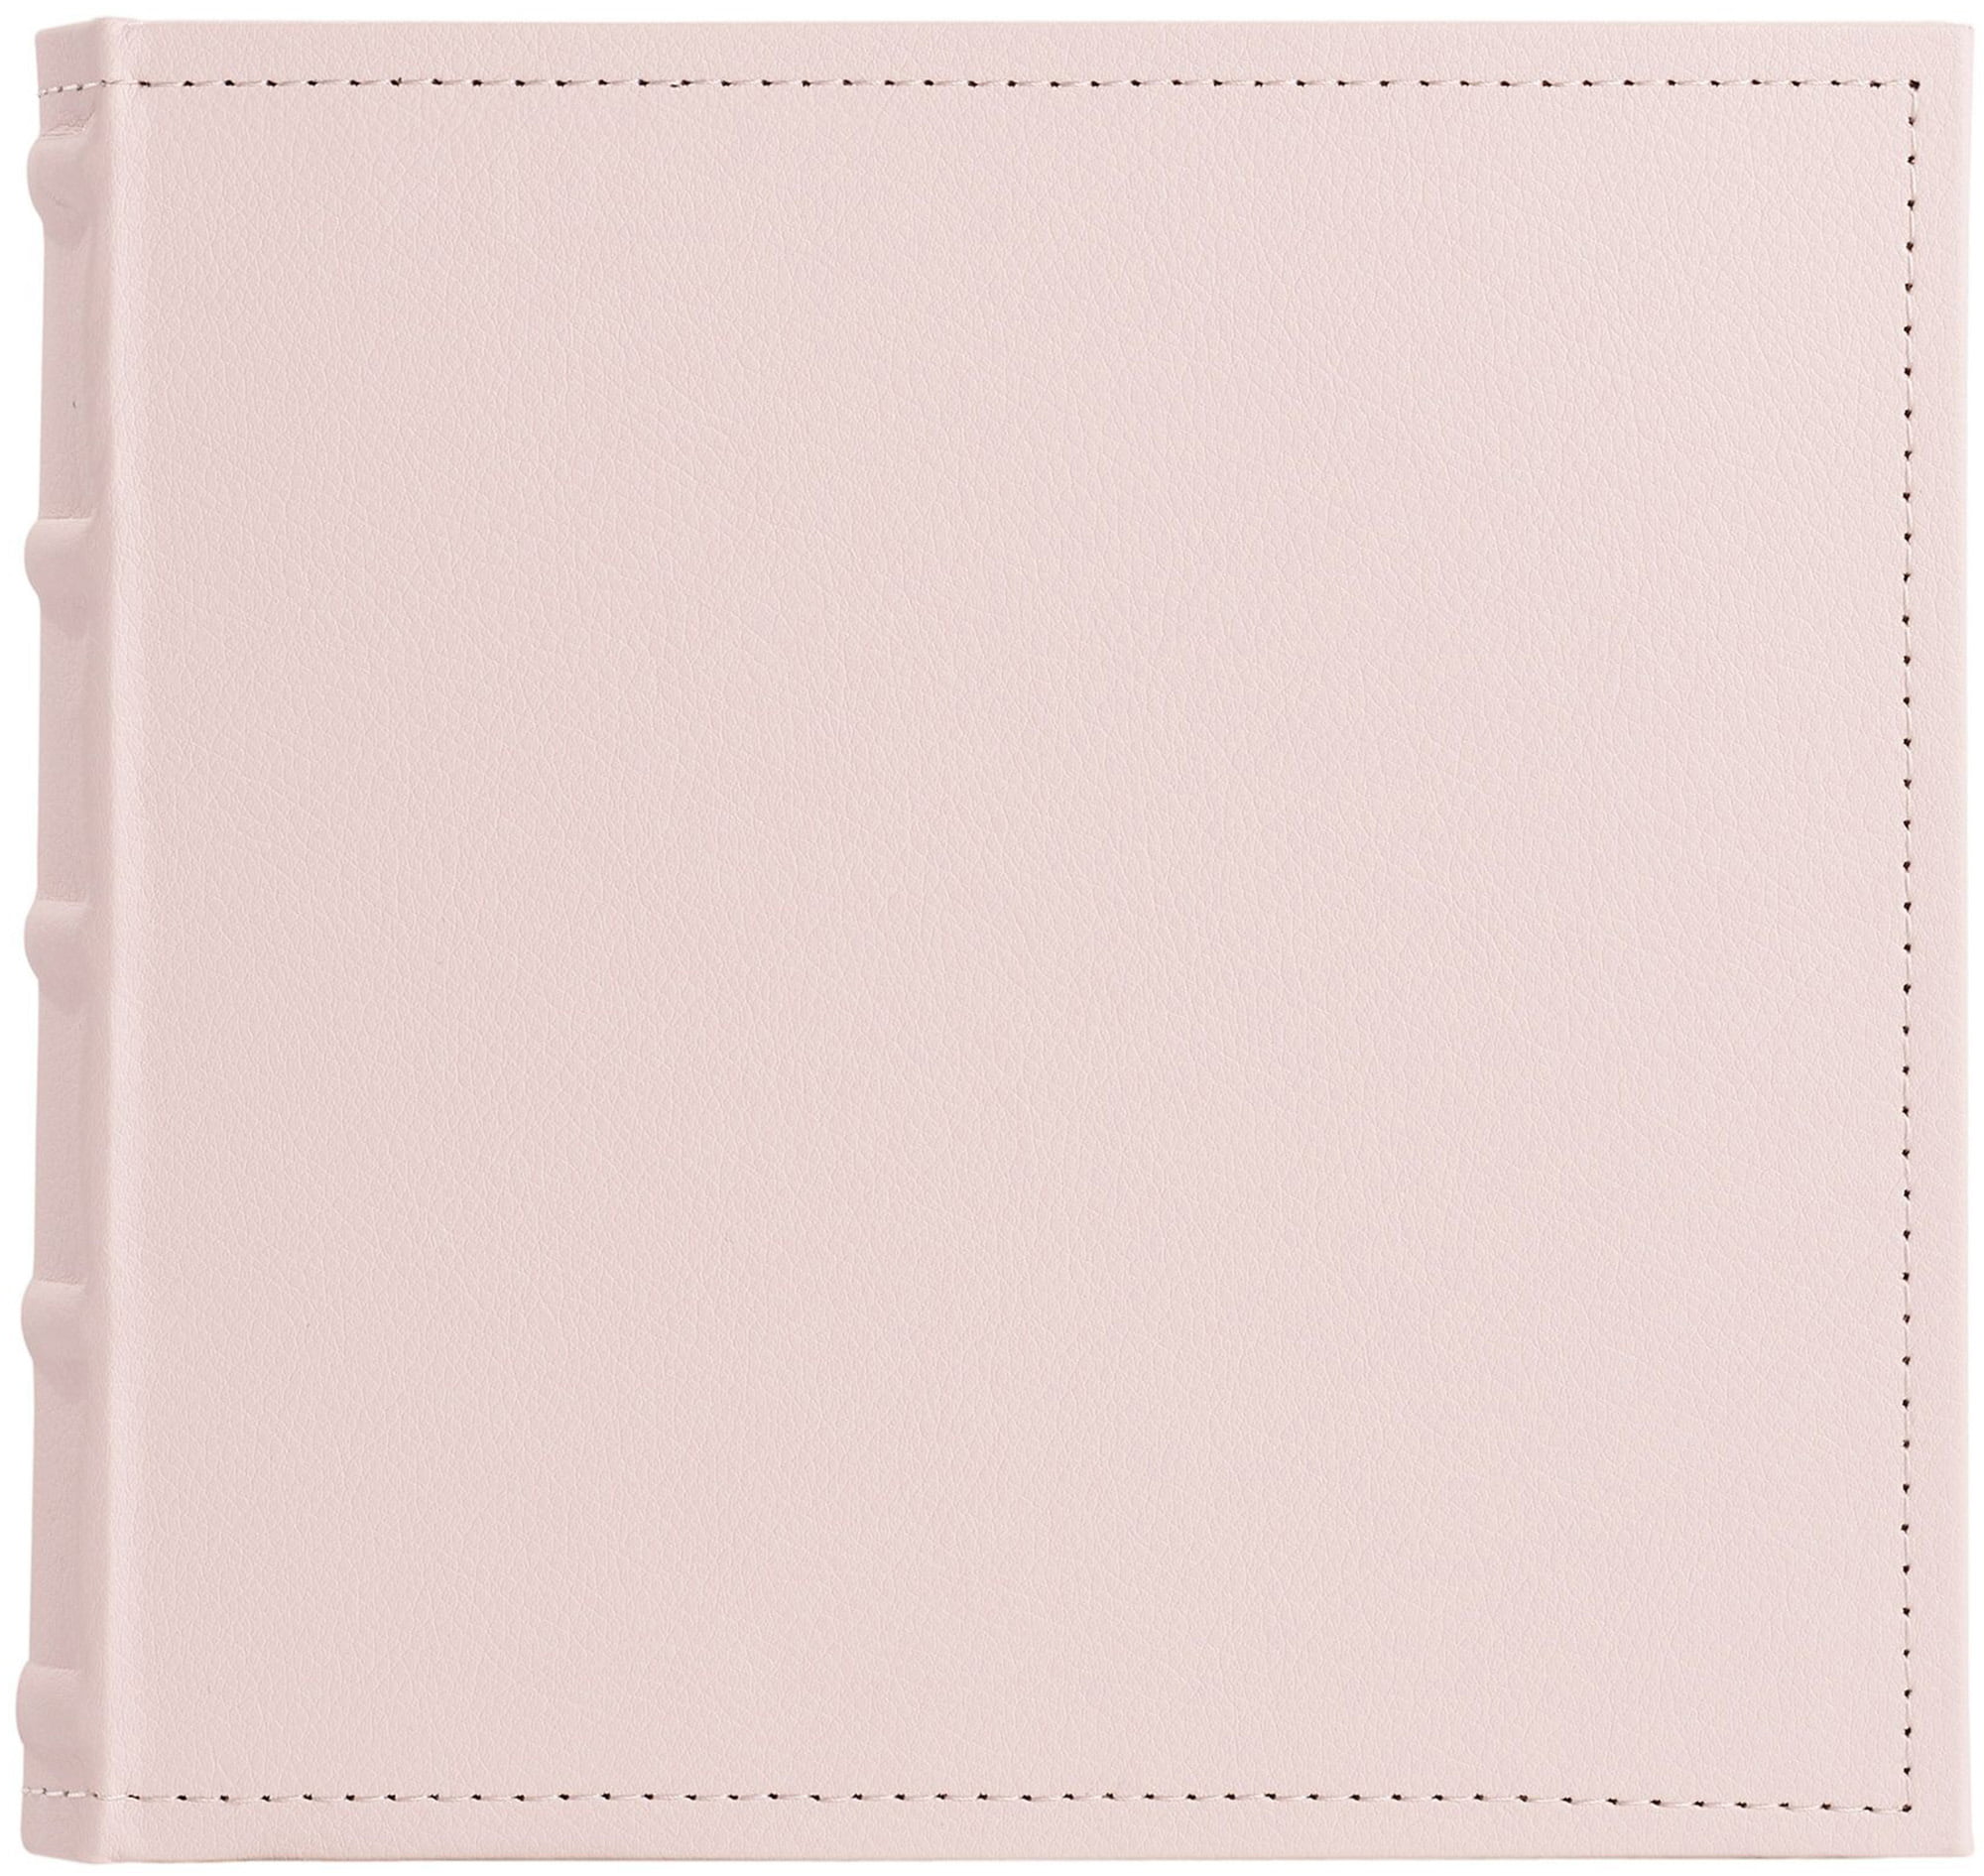 Woodland Albums; Peach cover option (11x14 album). Clean and